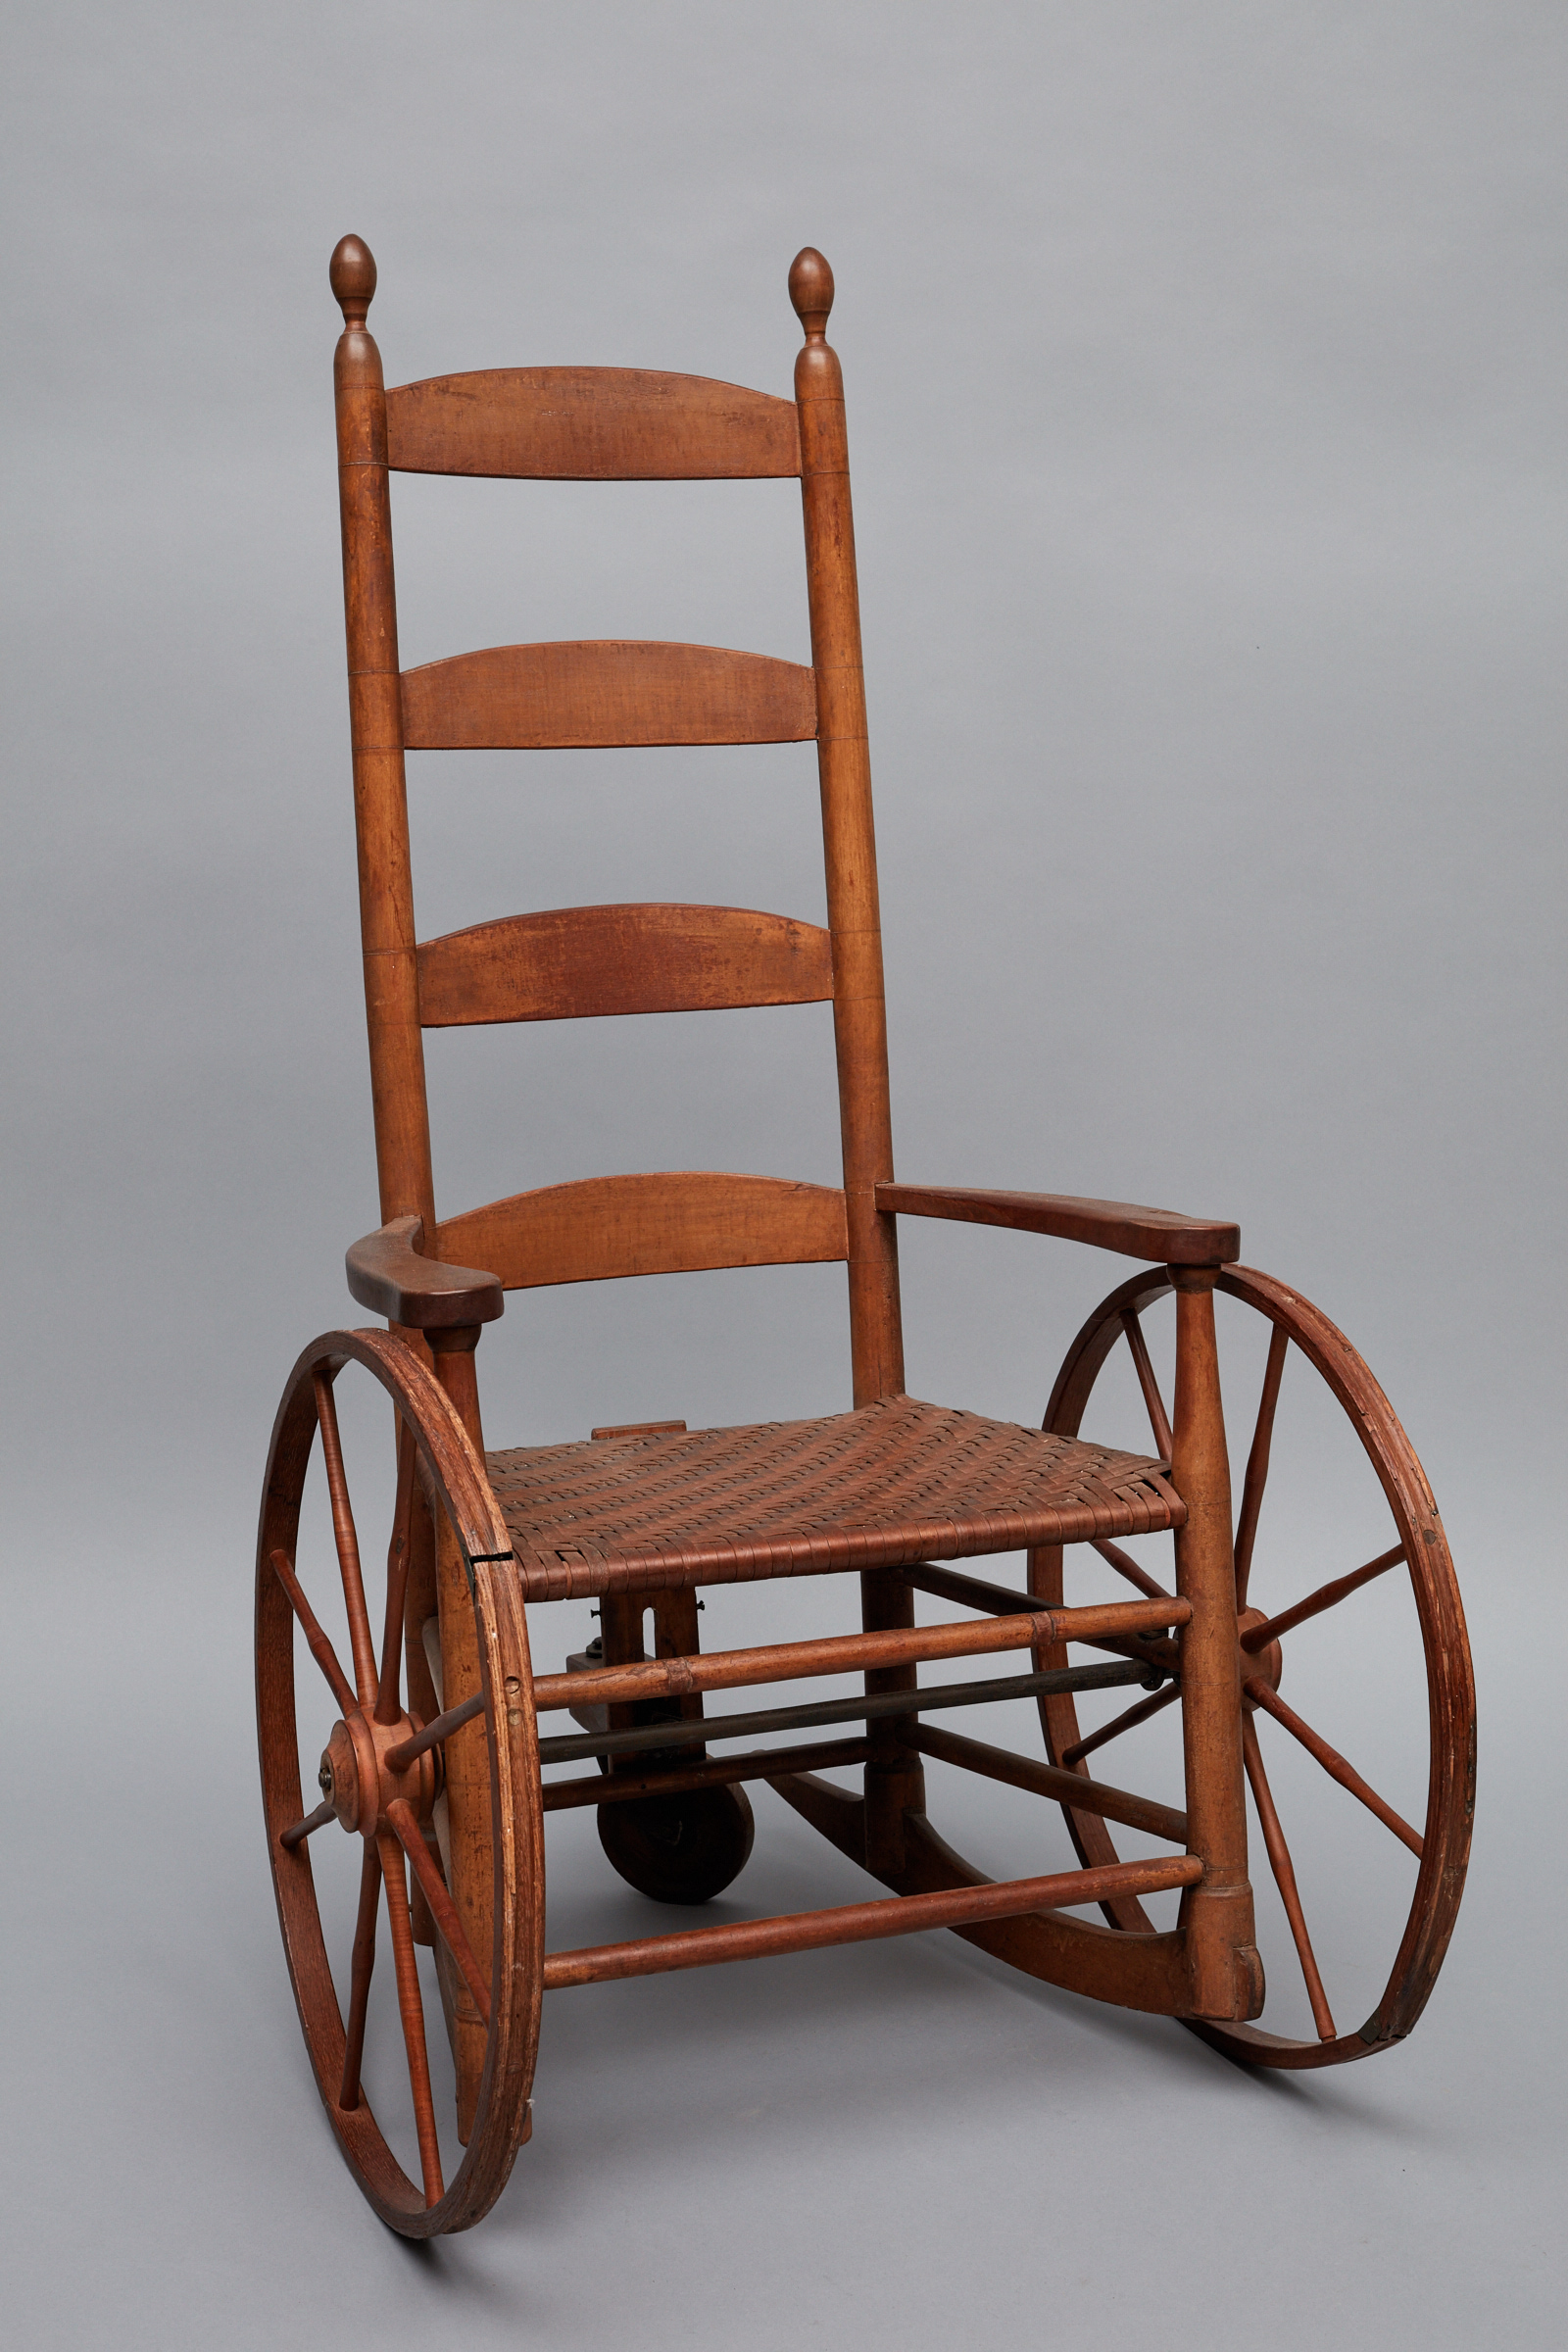 A wooden rocking chair on a gray background.